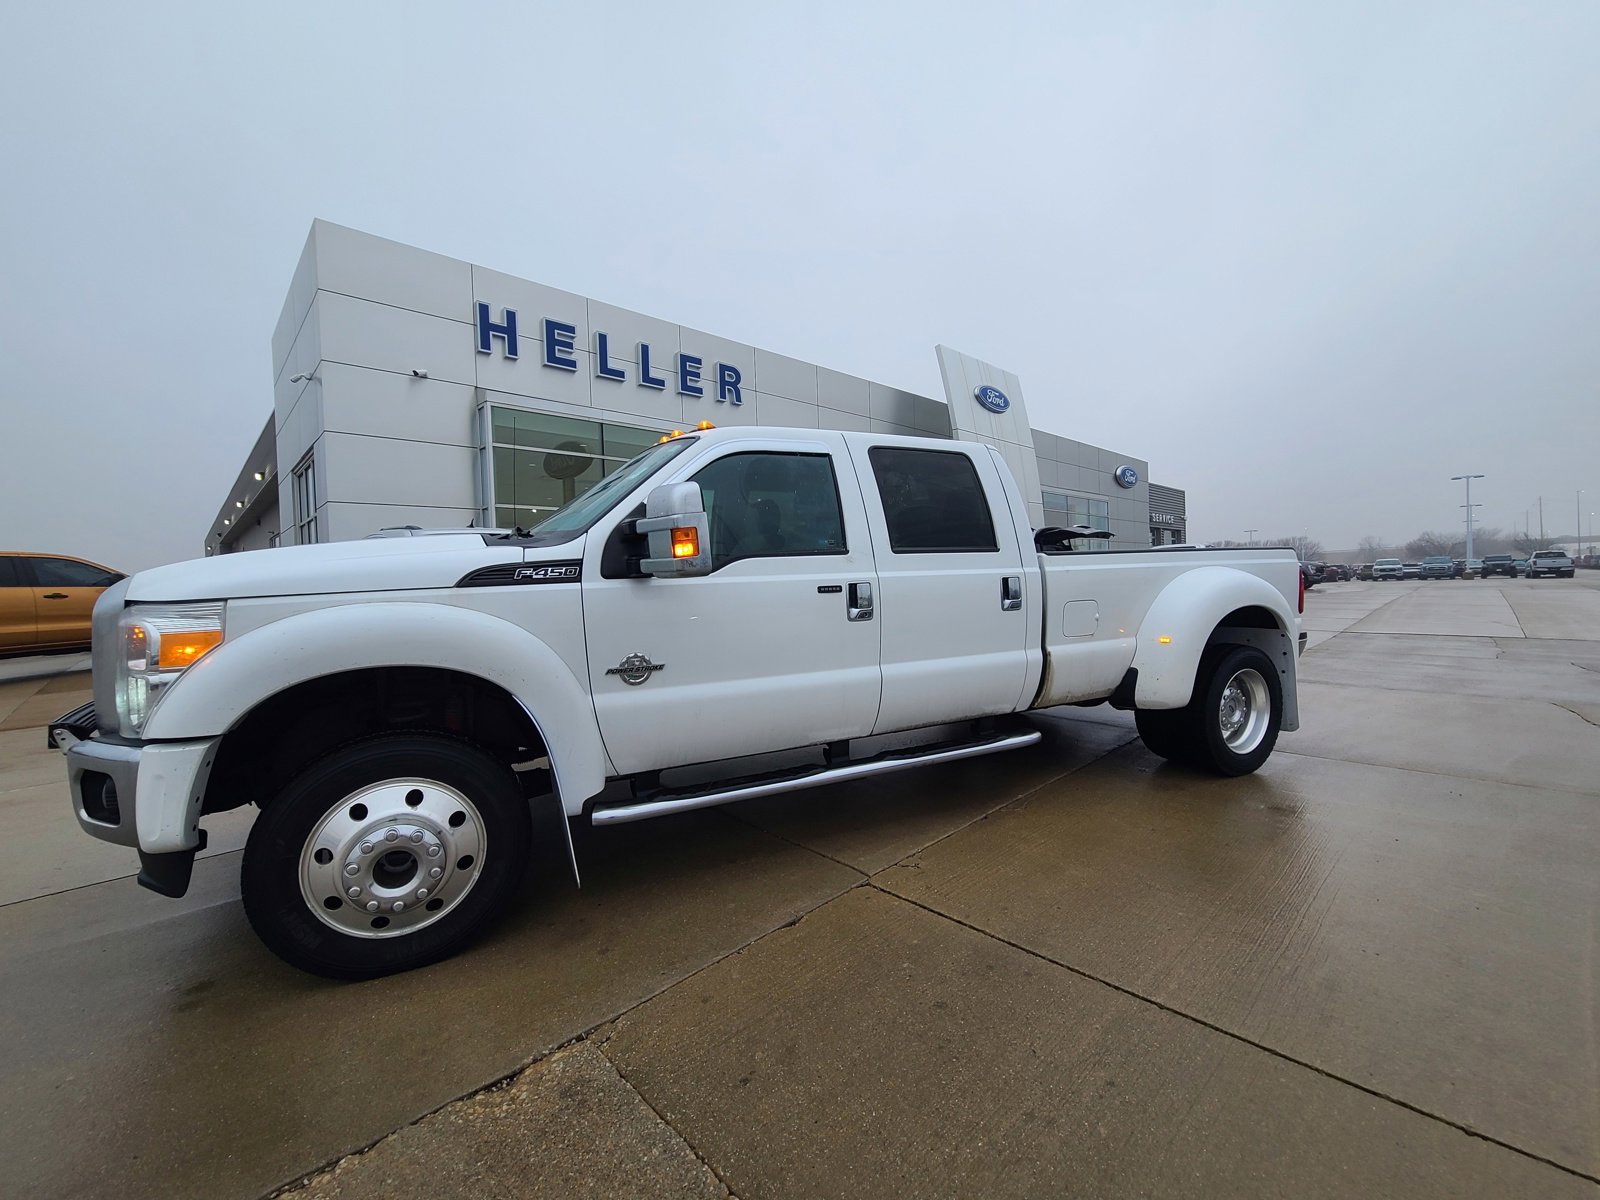 Pre-Owned 2015 Ford F-450 Super Duty XLT in El Paso #U22934 | Heller Ford